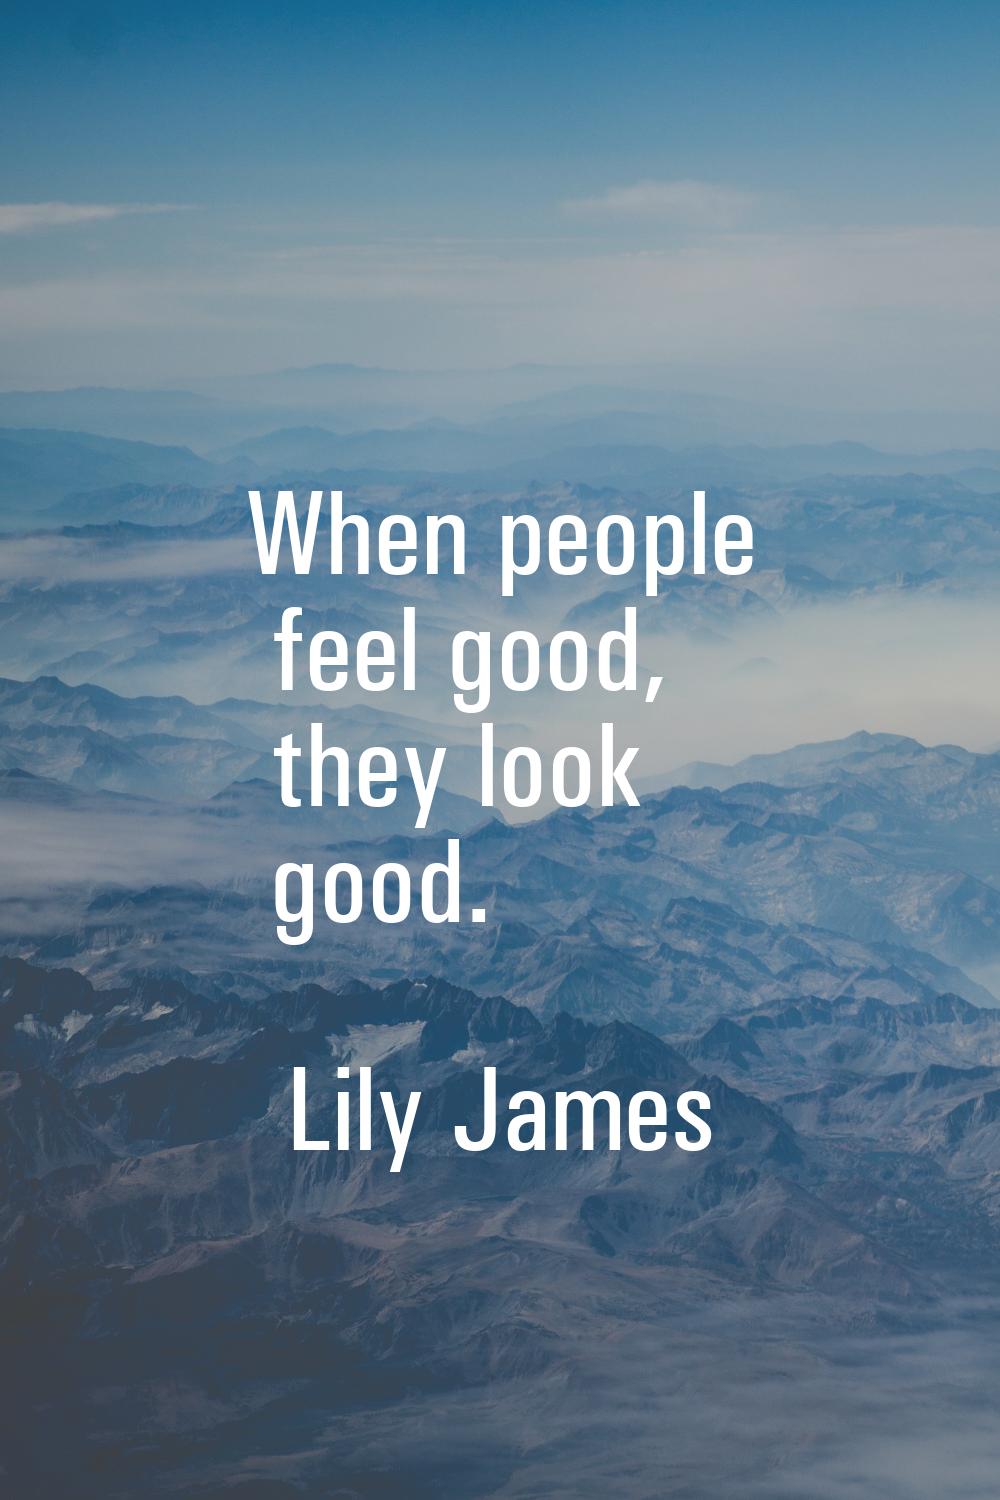 When people feel good, they look good.